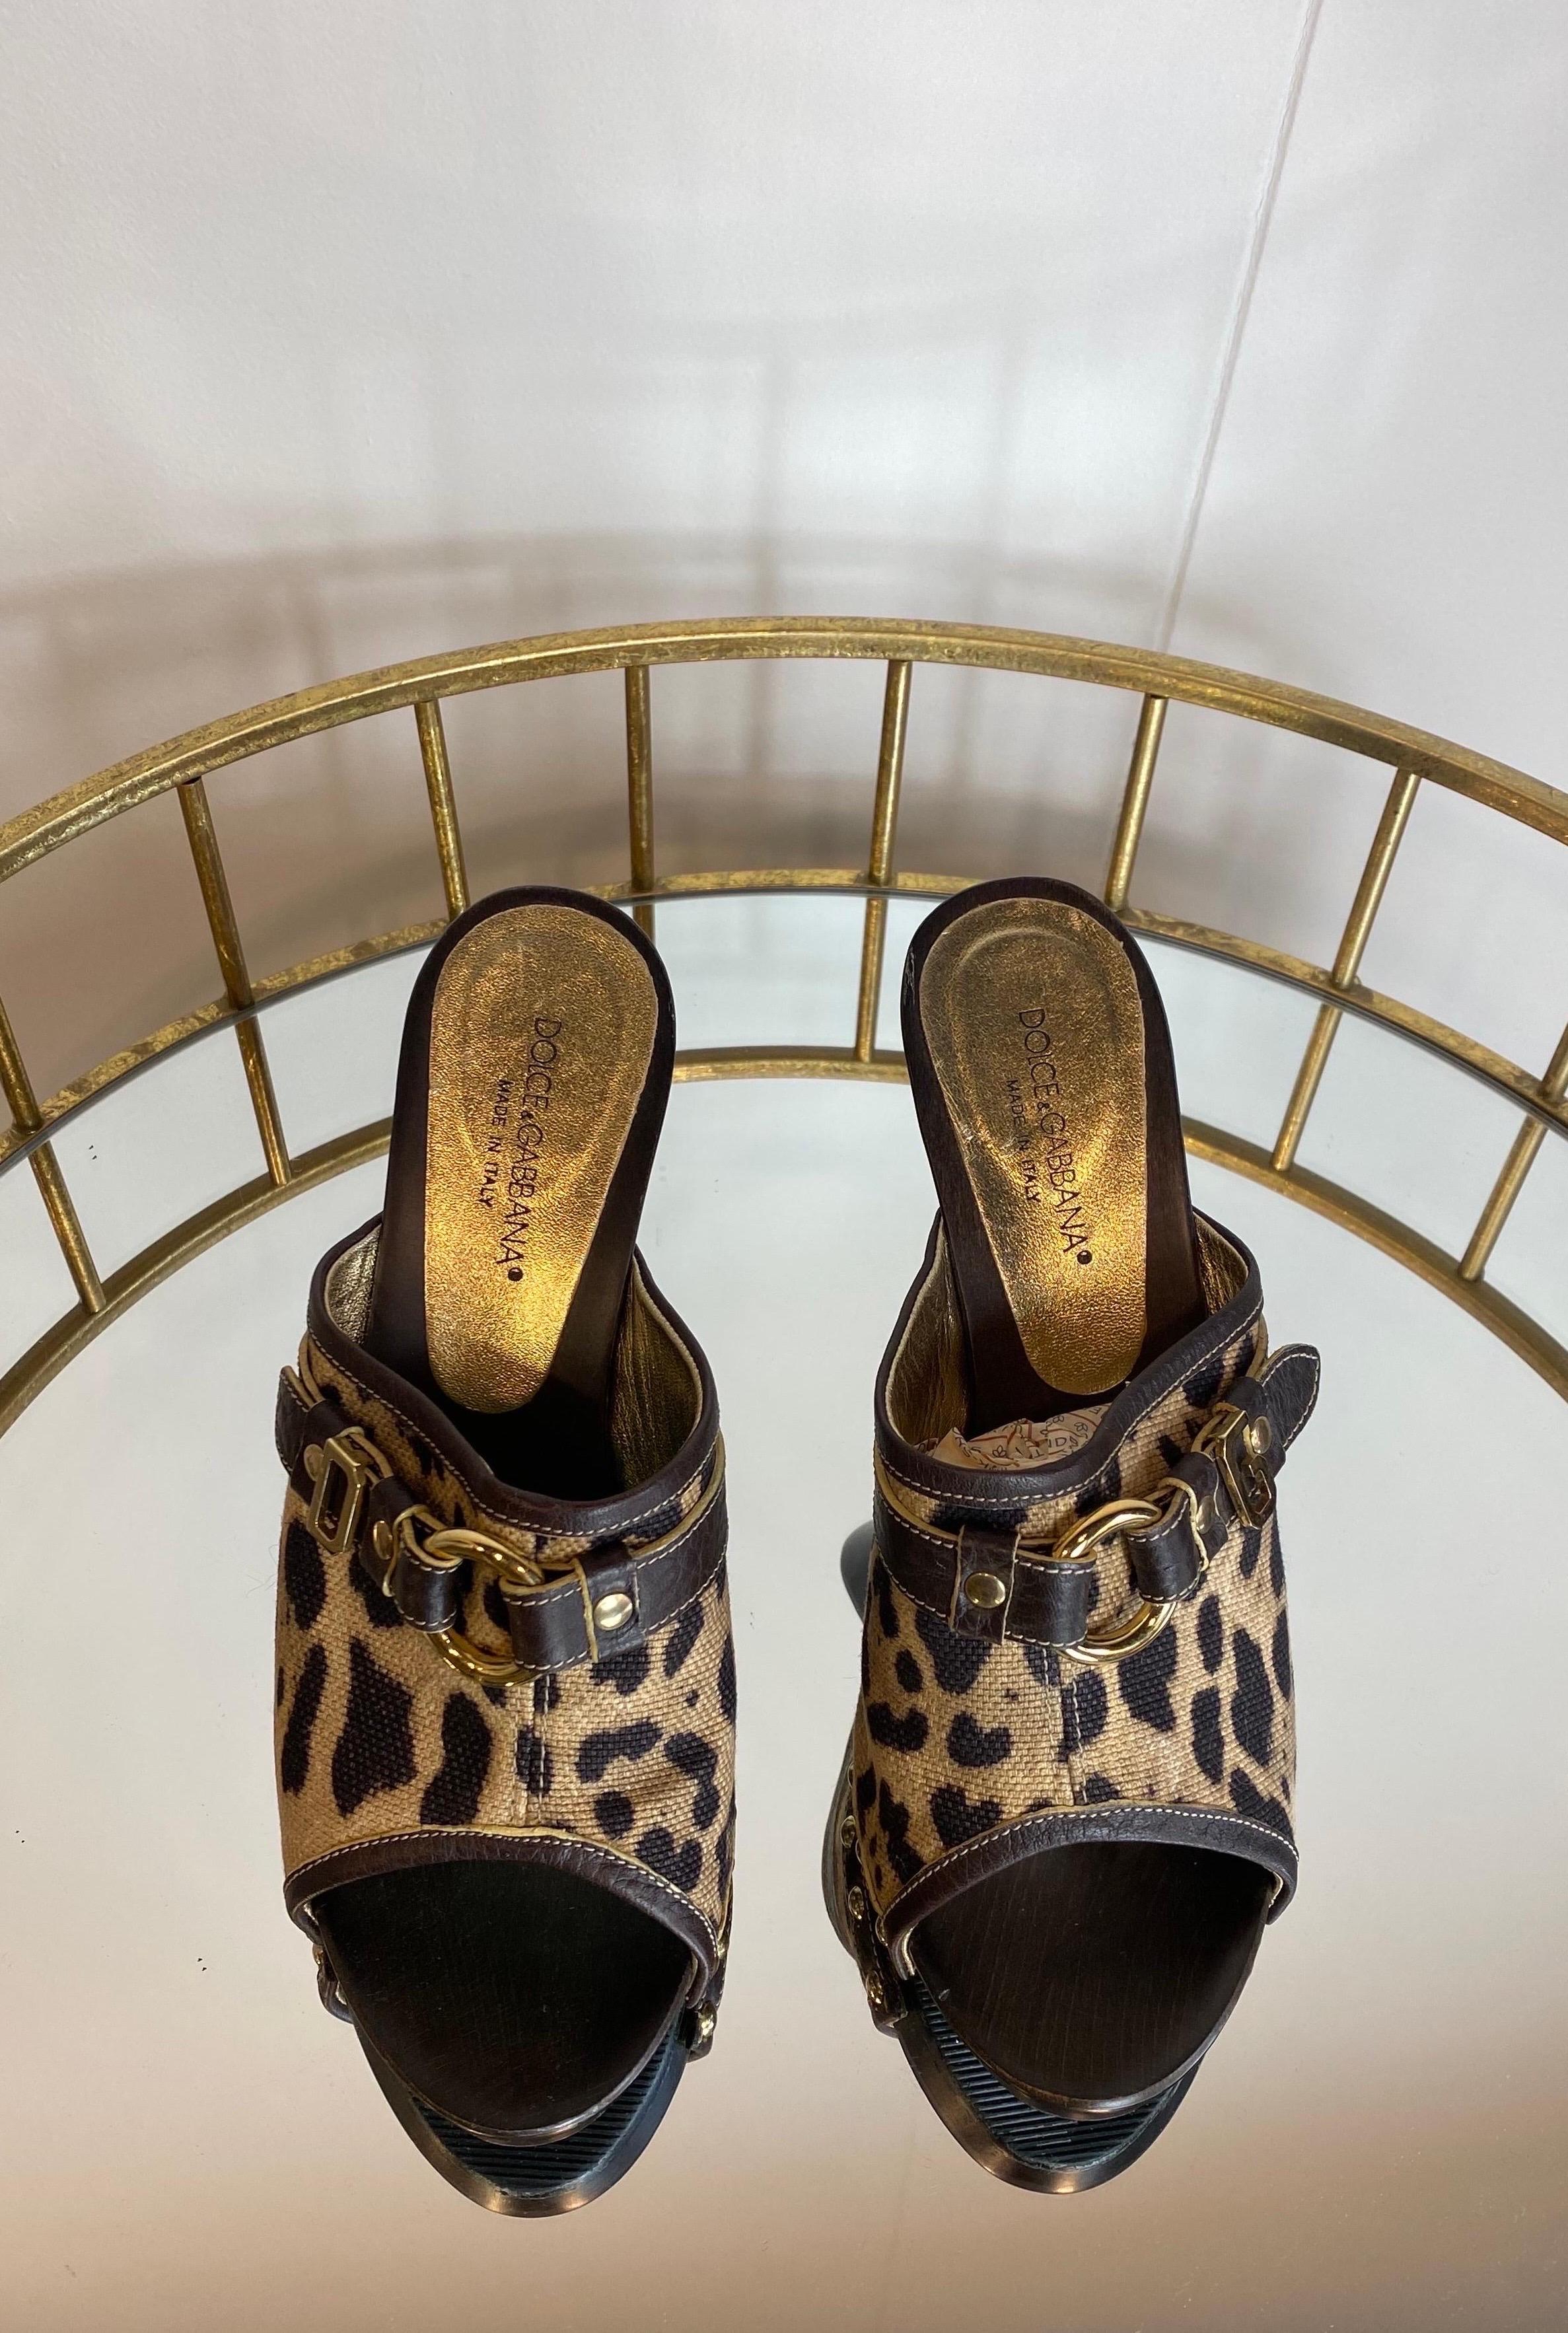 Dolce and Gabbana Leopard print Clogs In Excellent Condition For Sale In Carnate, IT